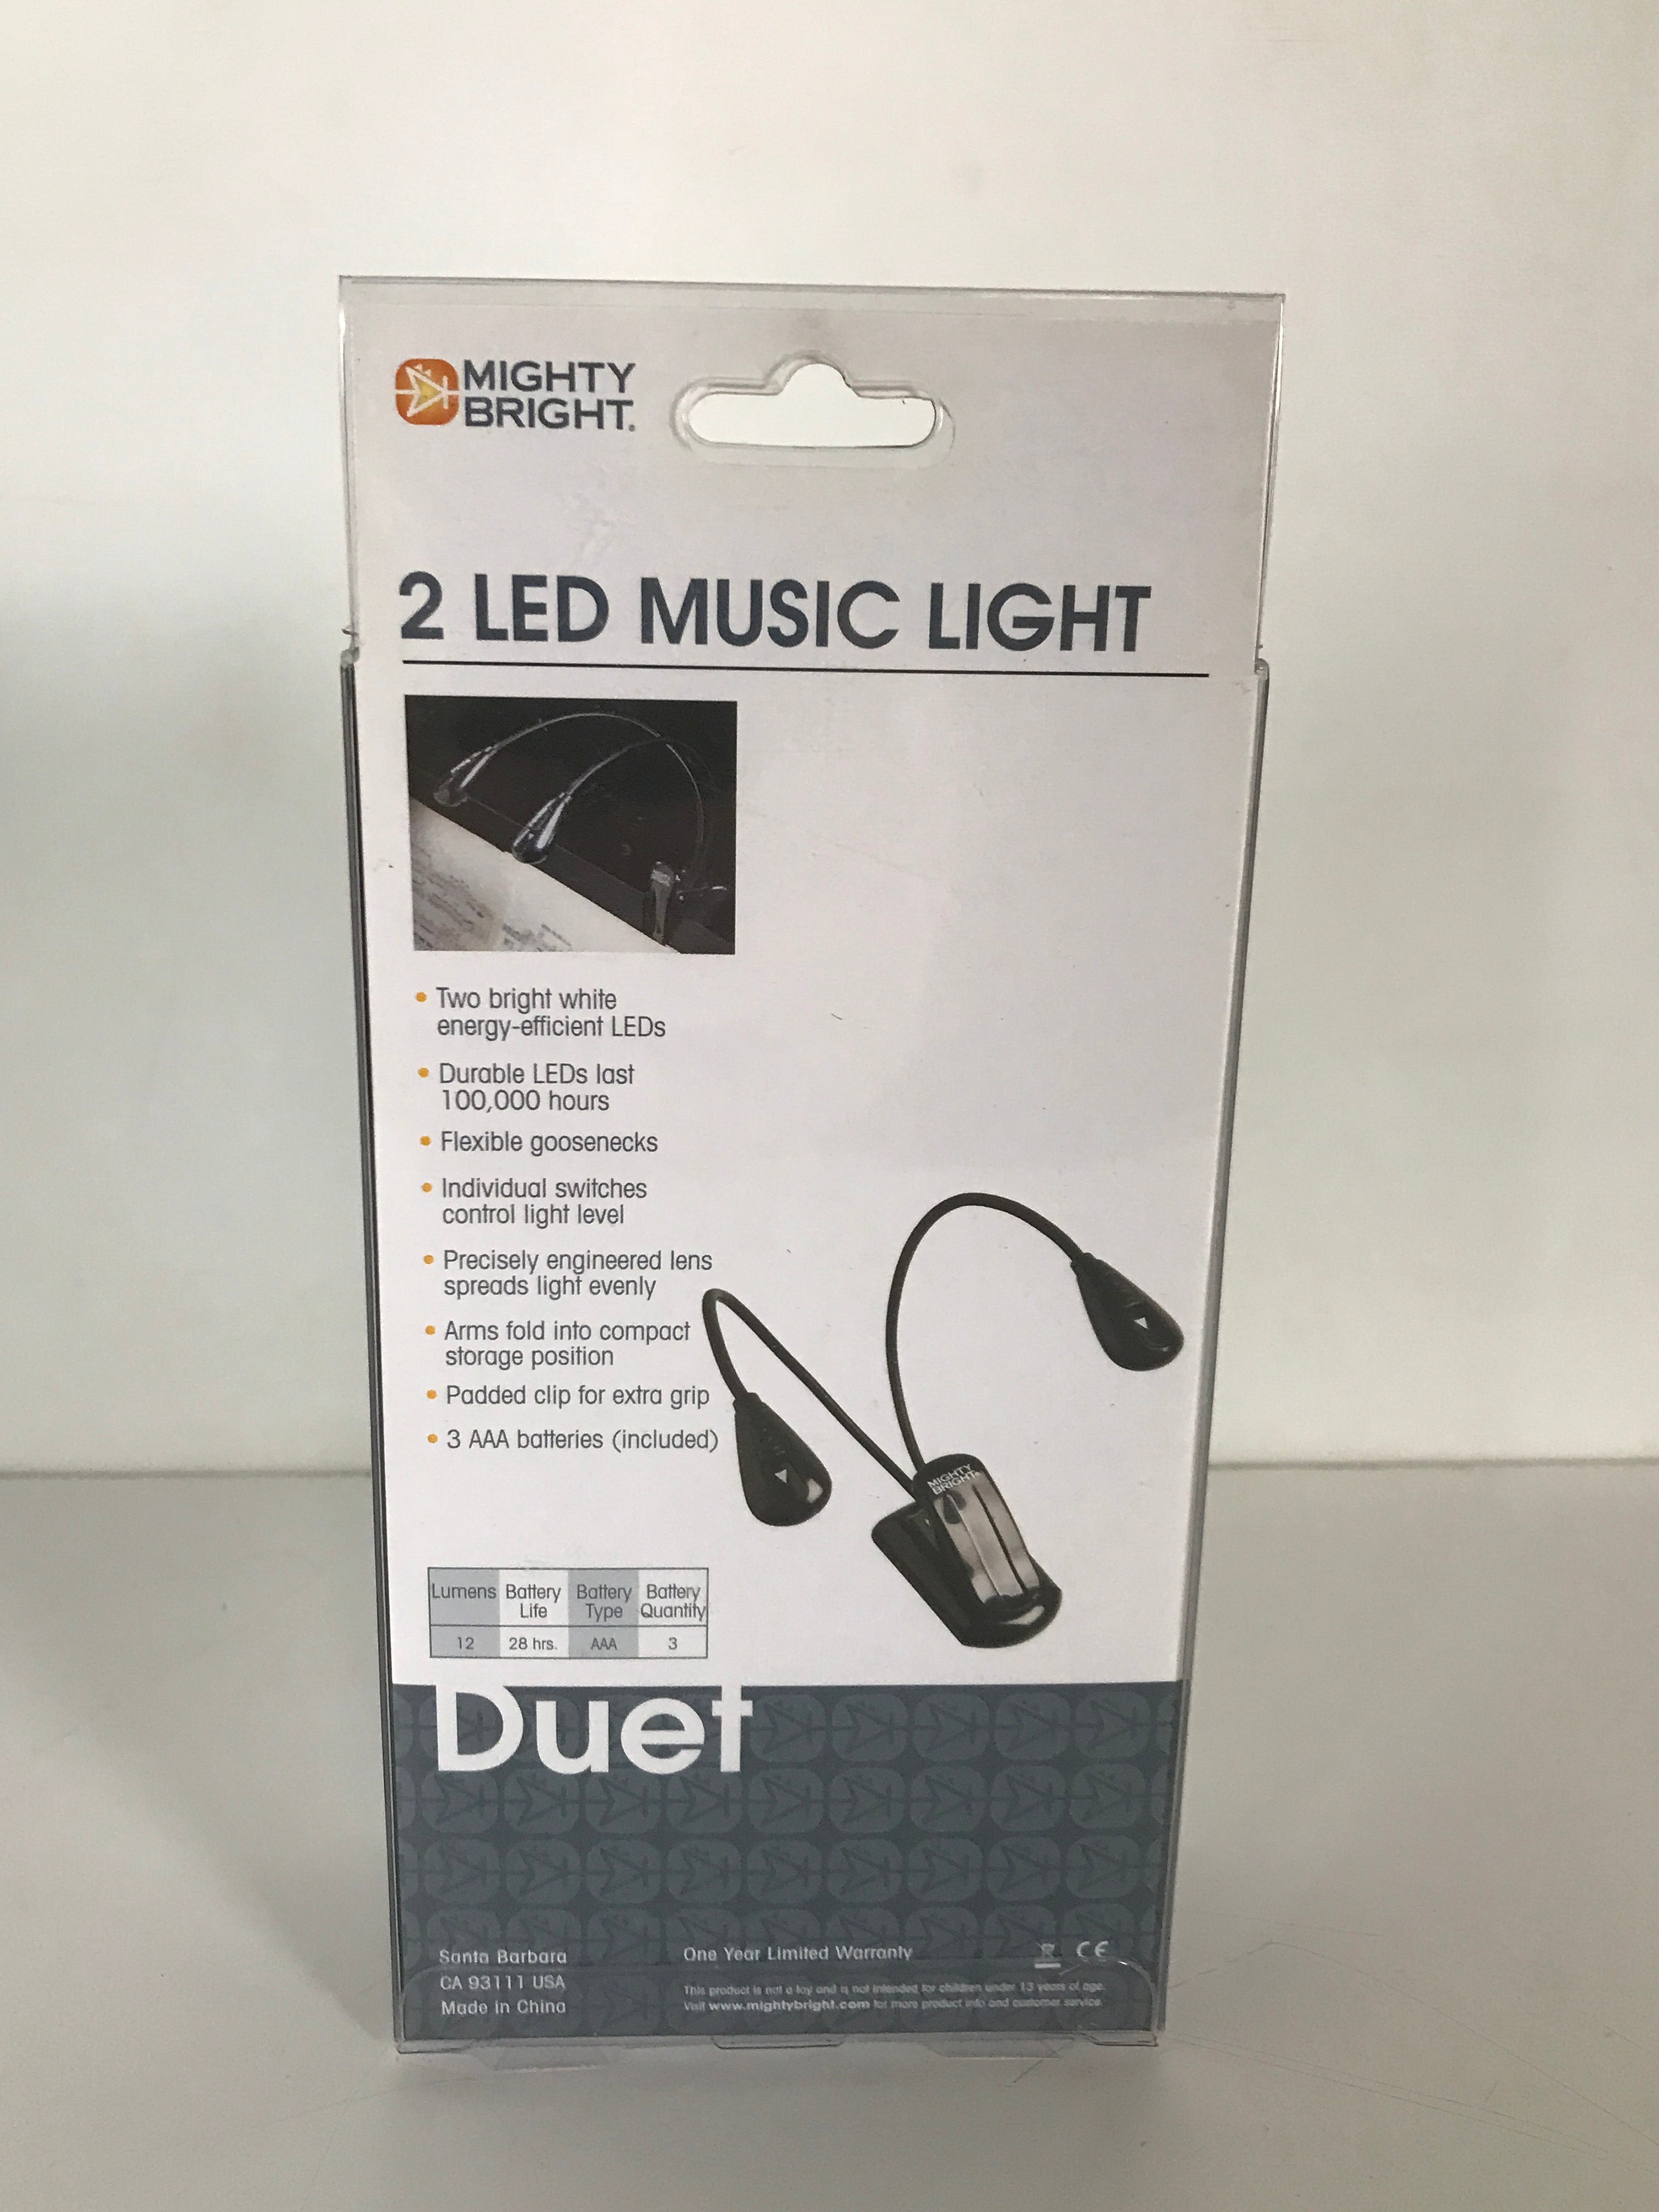 Mighty Bright 2 LED Music Light